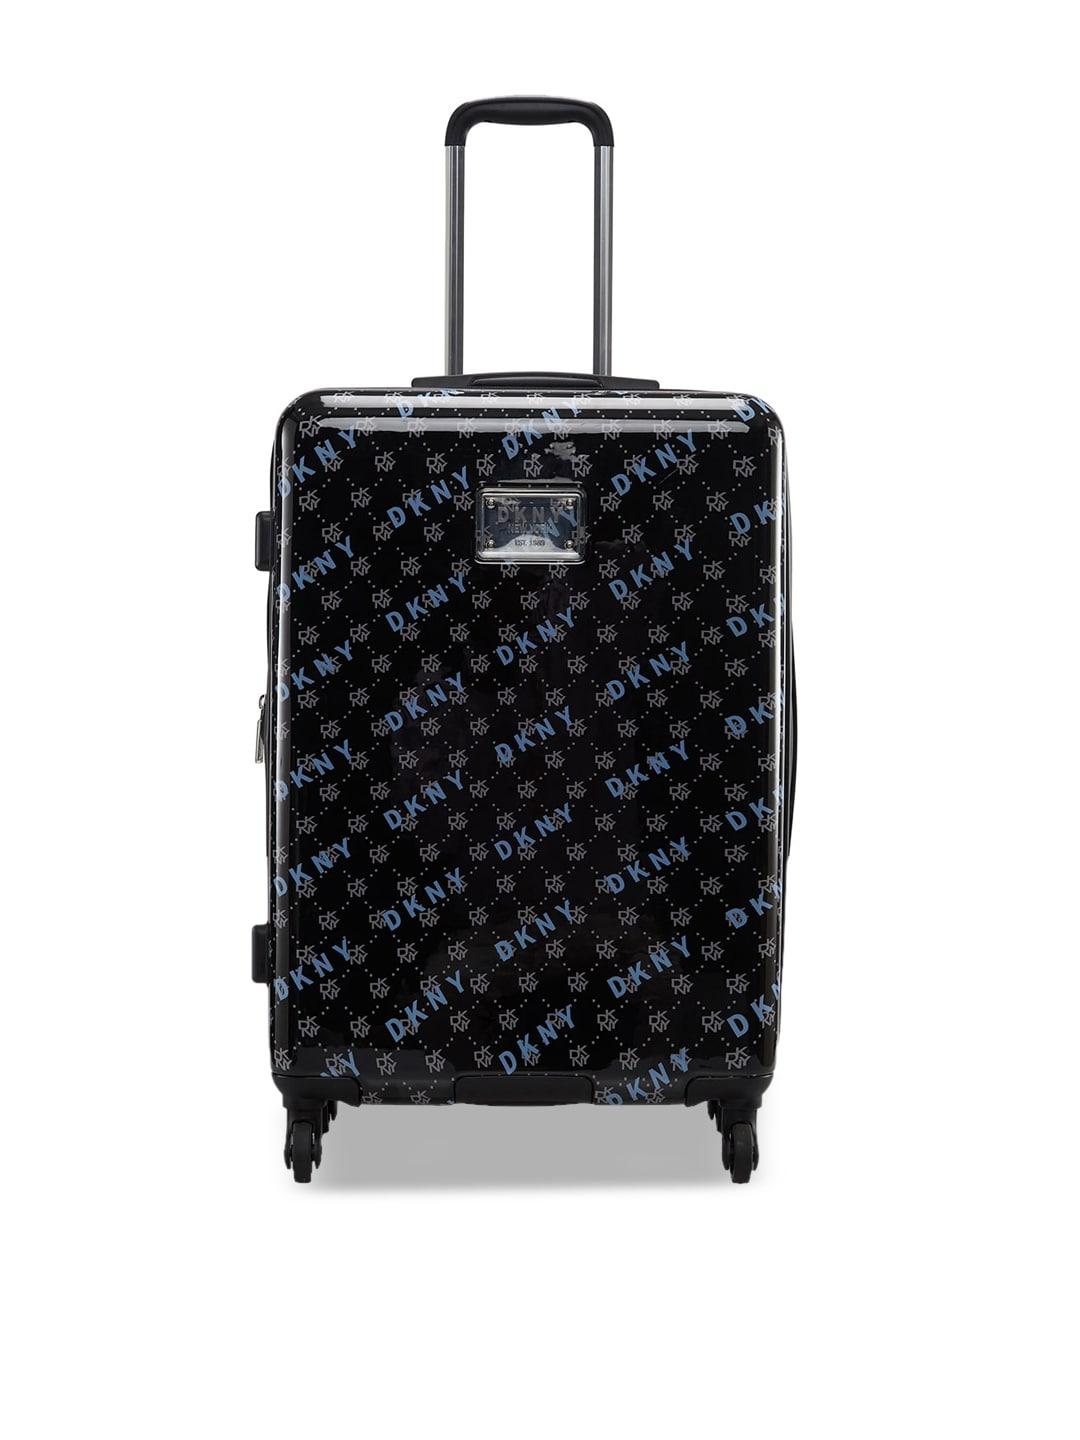 dkny on repeat black & gold printed hard-sided medium abs trolley suitcase